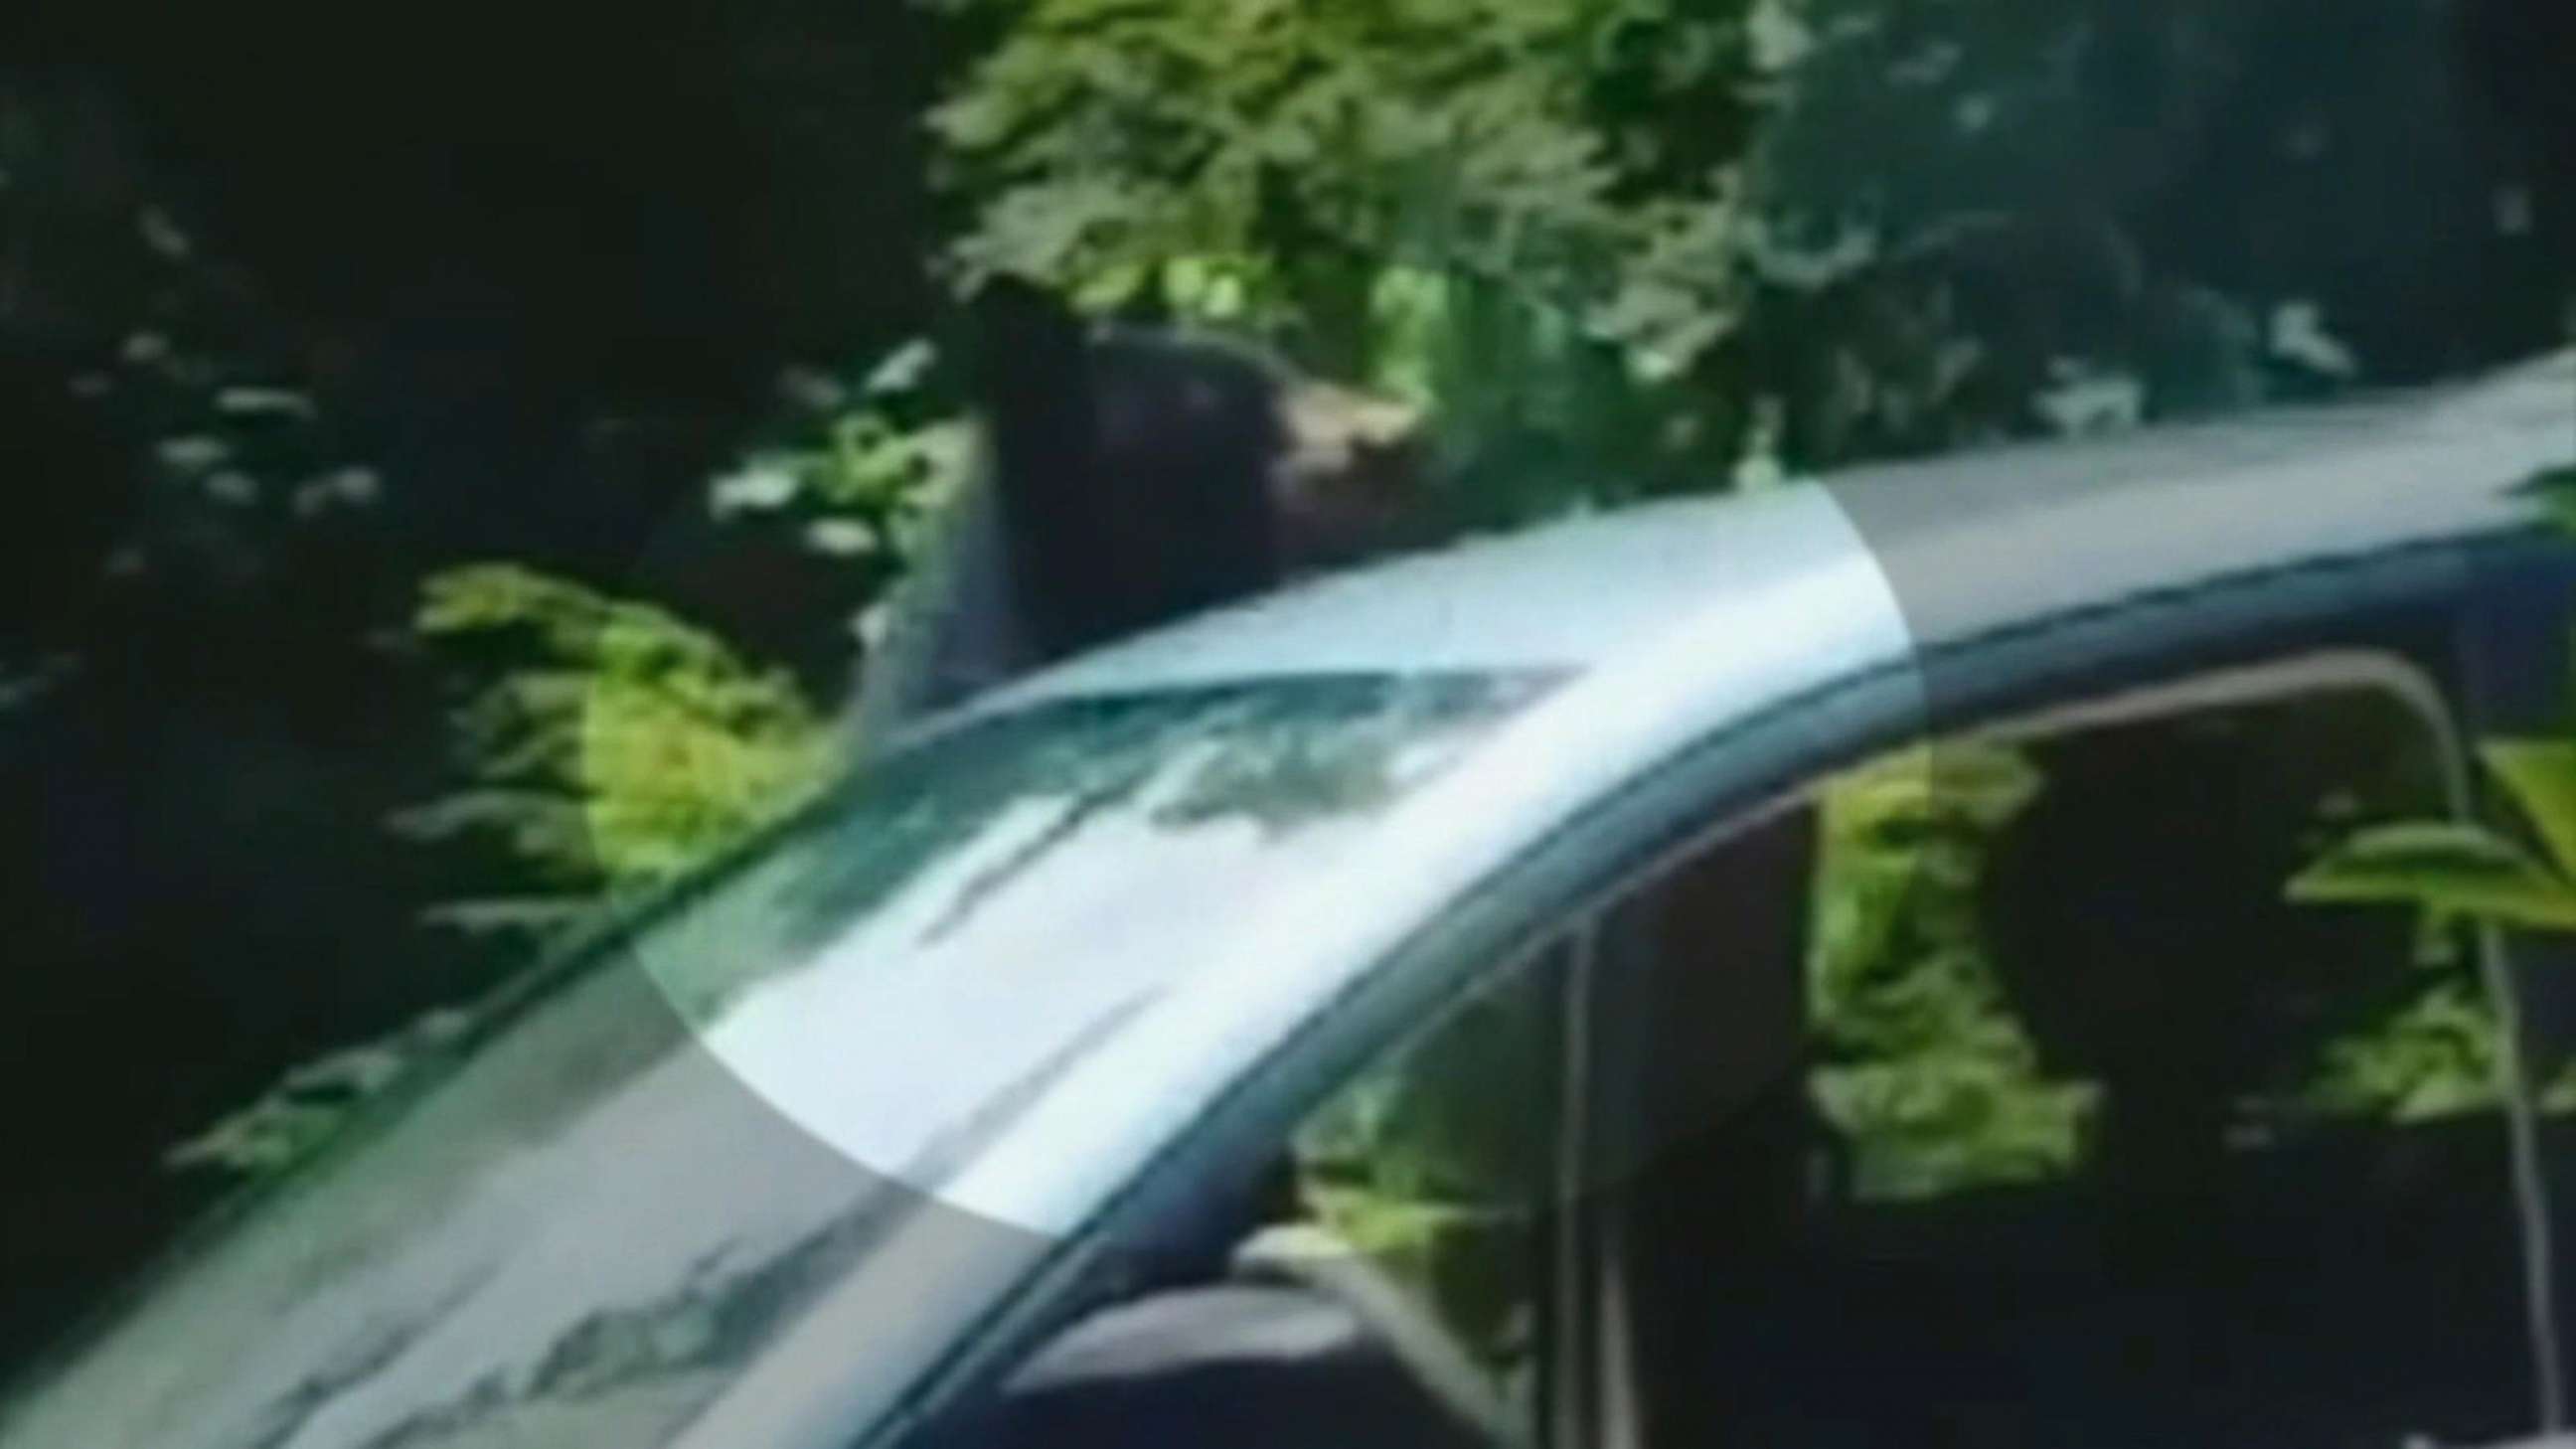 PHOTO: A black bear climbed into a woman's minivan and ate her lunch on July 12, 2018, in Rabun County, Georgia.
